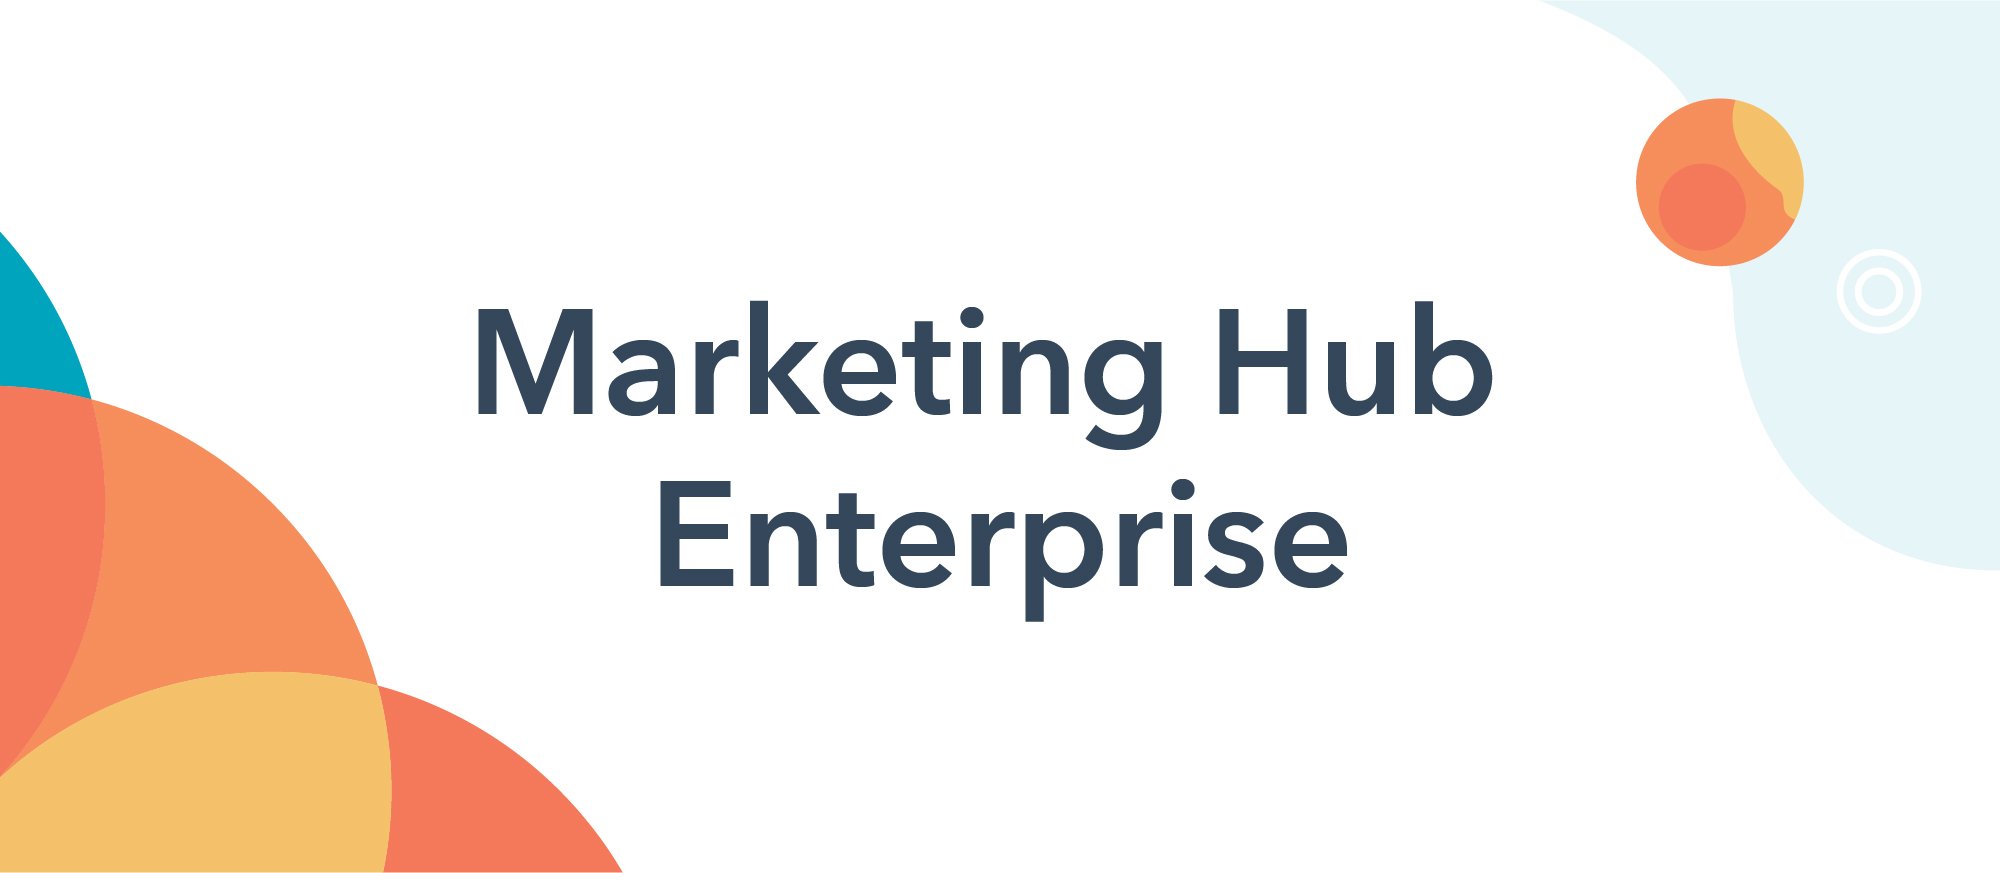 Ease-of-Use Enters the Enterprise: HubSpot Adds Powerful New Features to Marketing Hub Enterprise